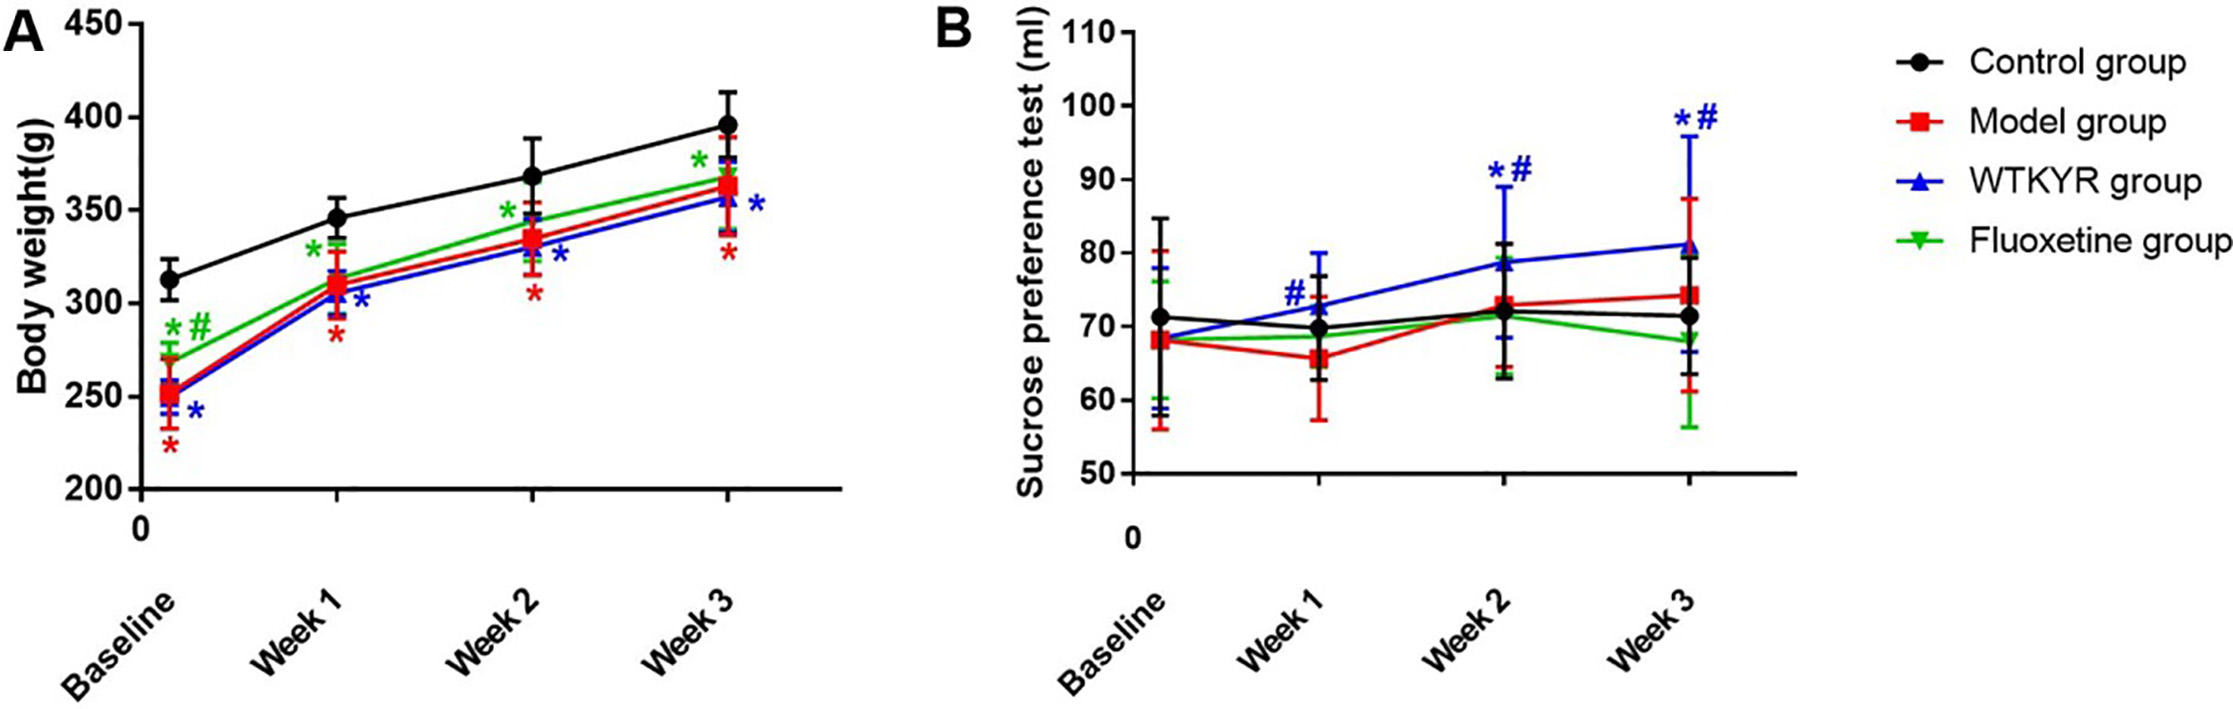 Body weight (A) and SPT (B) results of all groups at baseline (the last day of modeling) and at the end of each treatment week. As shown in Fig. 1A, all groups that received CUMS modeling had lower body weights than the control group. The rats in the fluoxetine group and WTKYR group gradually gained weight during the treatment, but there remained an obvious discrepancy with the control group by the end of the therapy. The SPT data indicated no difference among the four groups at baseline. With the progress of treatment, rats in the WTKYR group consumed more sucrose than the model group. In the last two weeks of treatment, rats in the WTKYR group displayed remarkable higher sucrose consumption than the control group. The symbol ‘*’ indicated that p-value is lower than 0.05 when compared with the control group, and the symbol ‘#’ expressed that p-value is lower than 0.05 when compared with the model group.